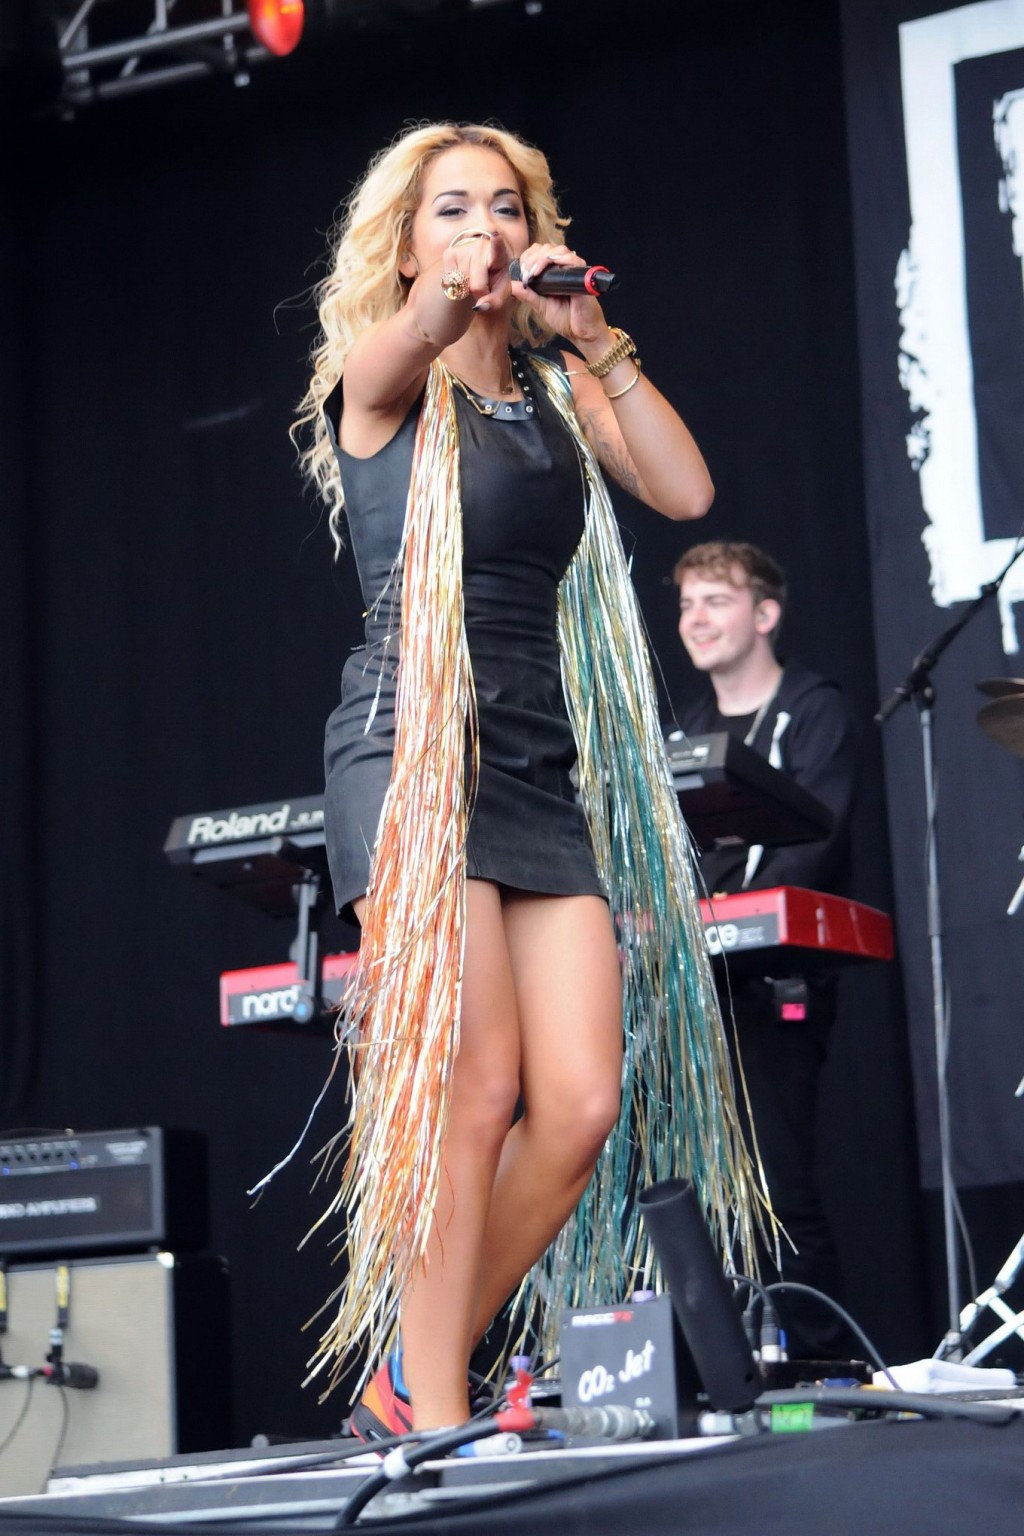 Rita Ora upskirt while performing at 'T in the Park #75257716